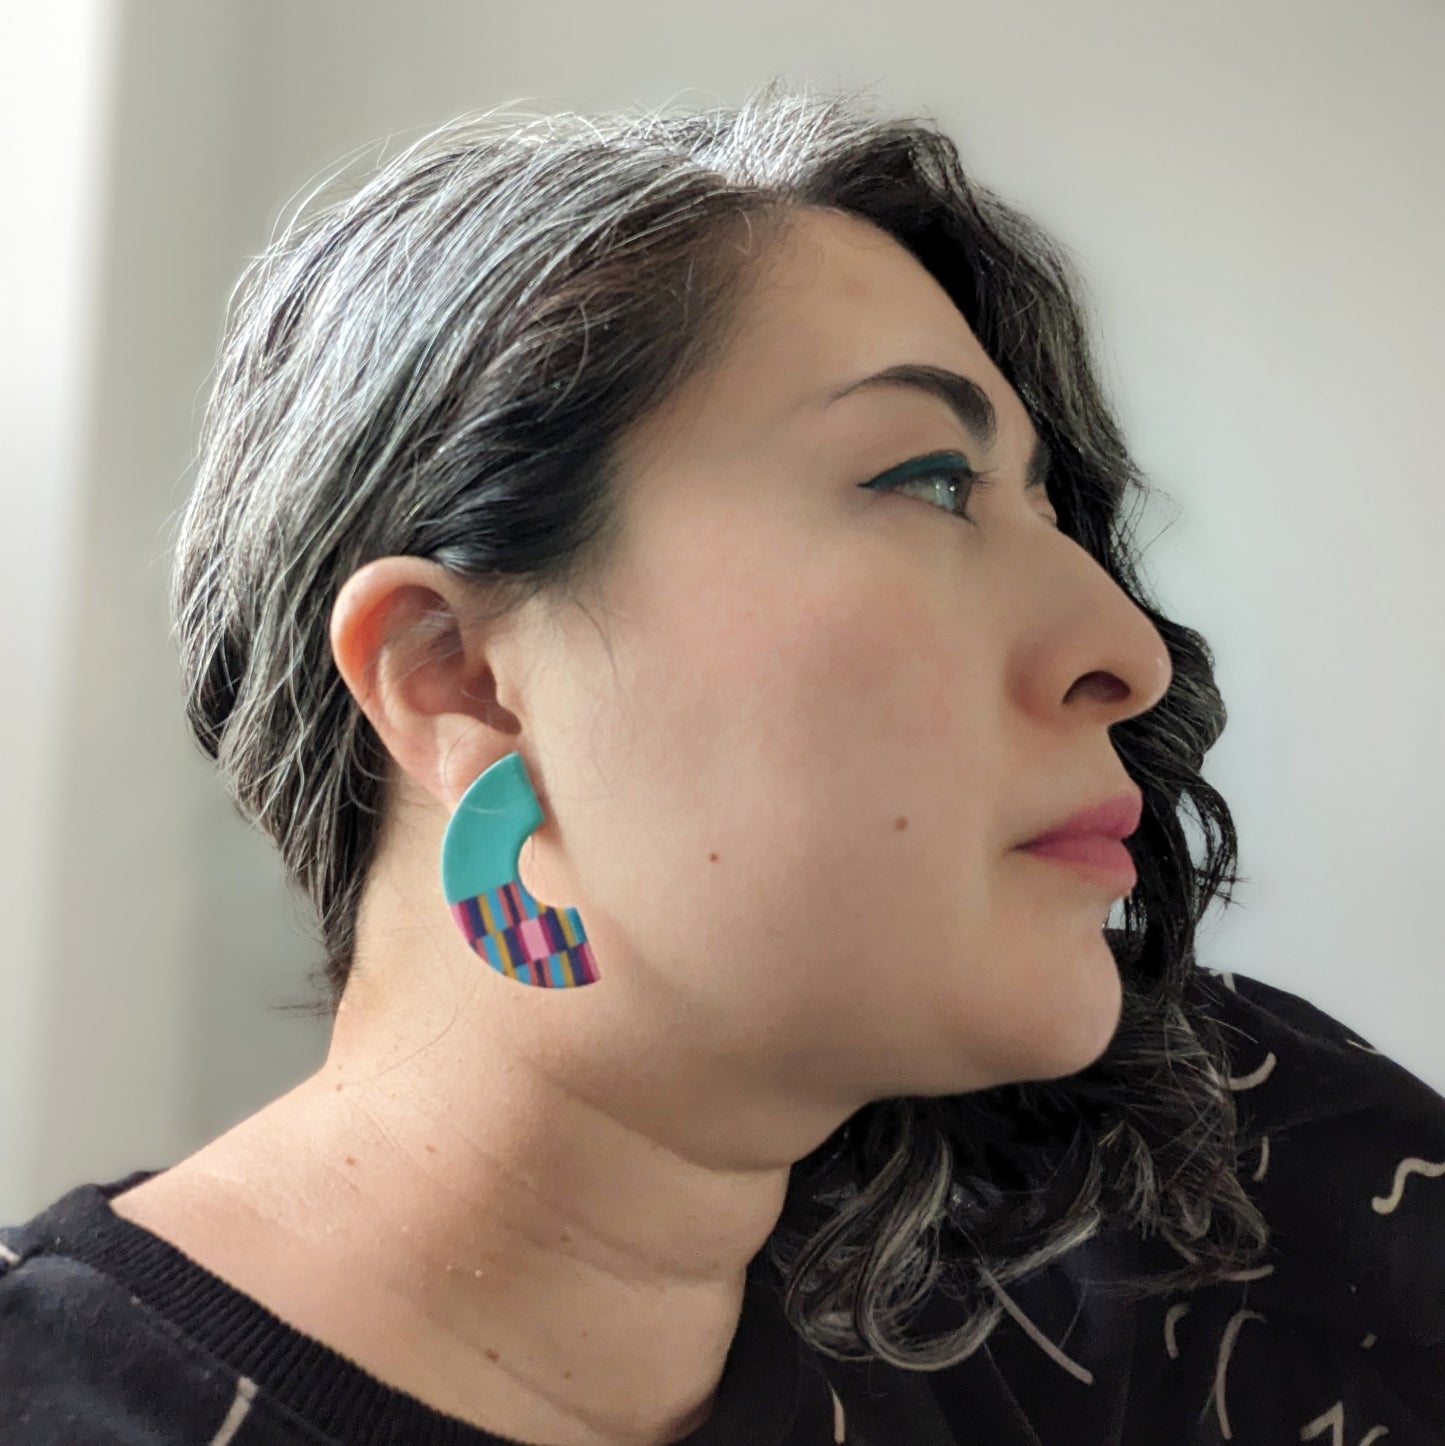 Seconds Sale - Mid-Century Arc and Curve Earrings